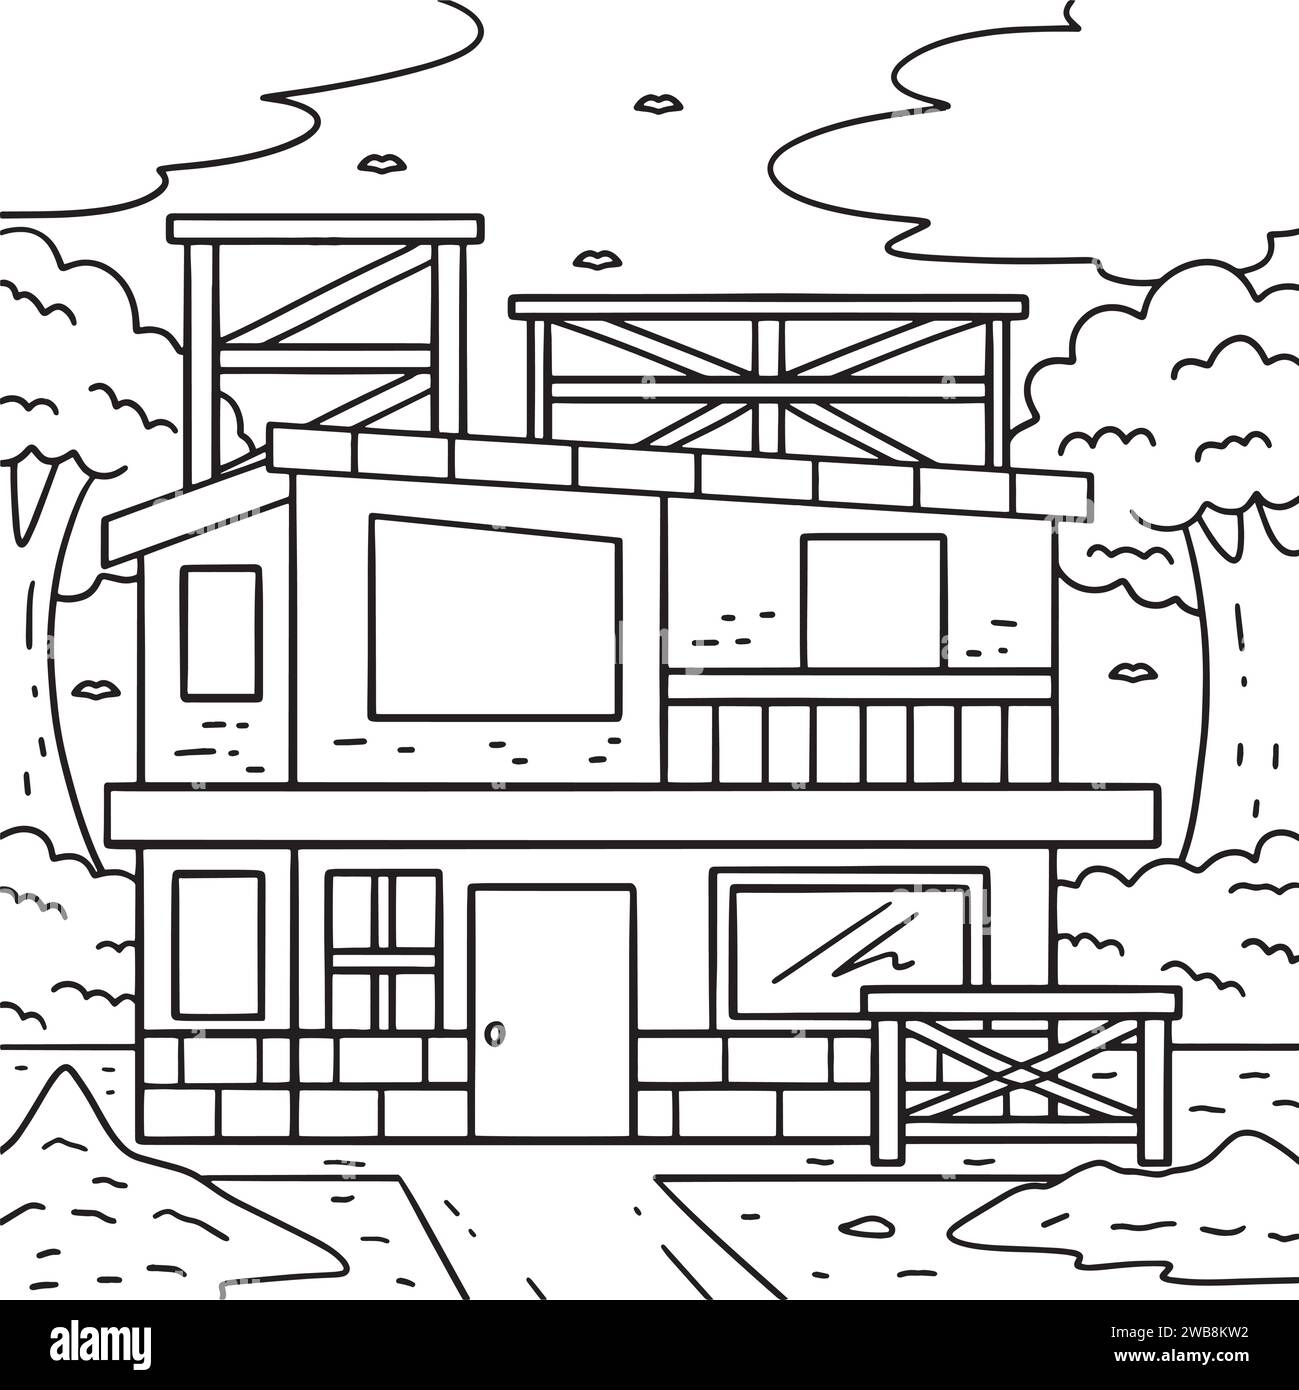 Building Under Construction Coloring Page for Kids Stock Vector